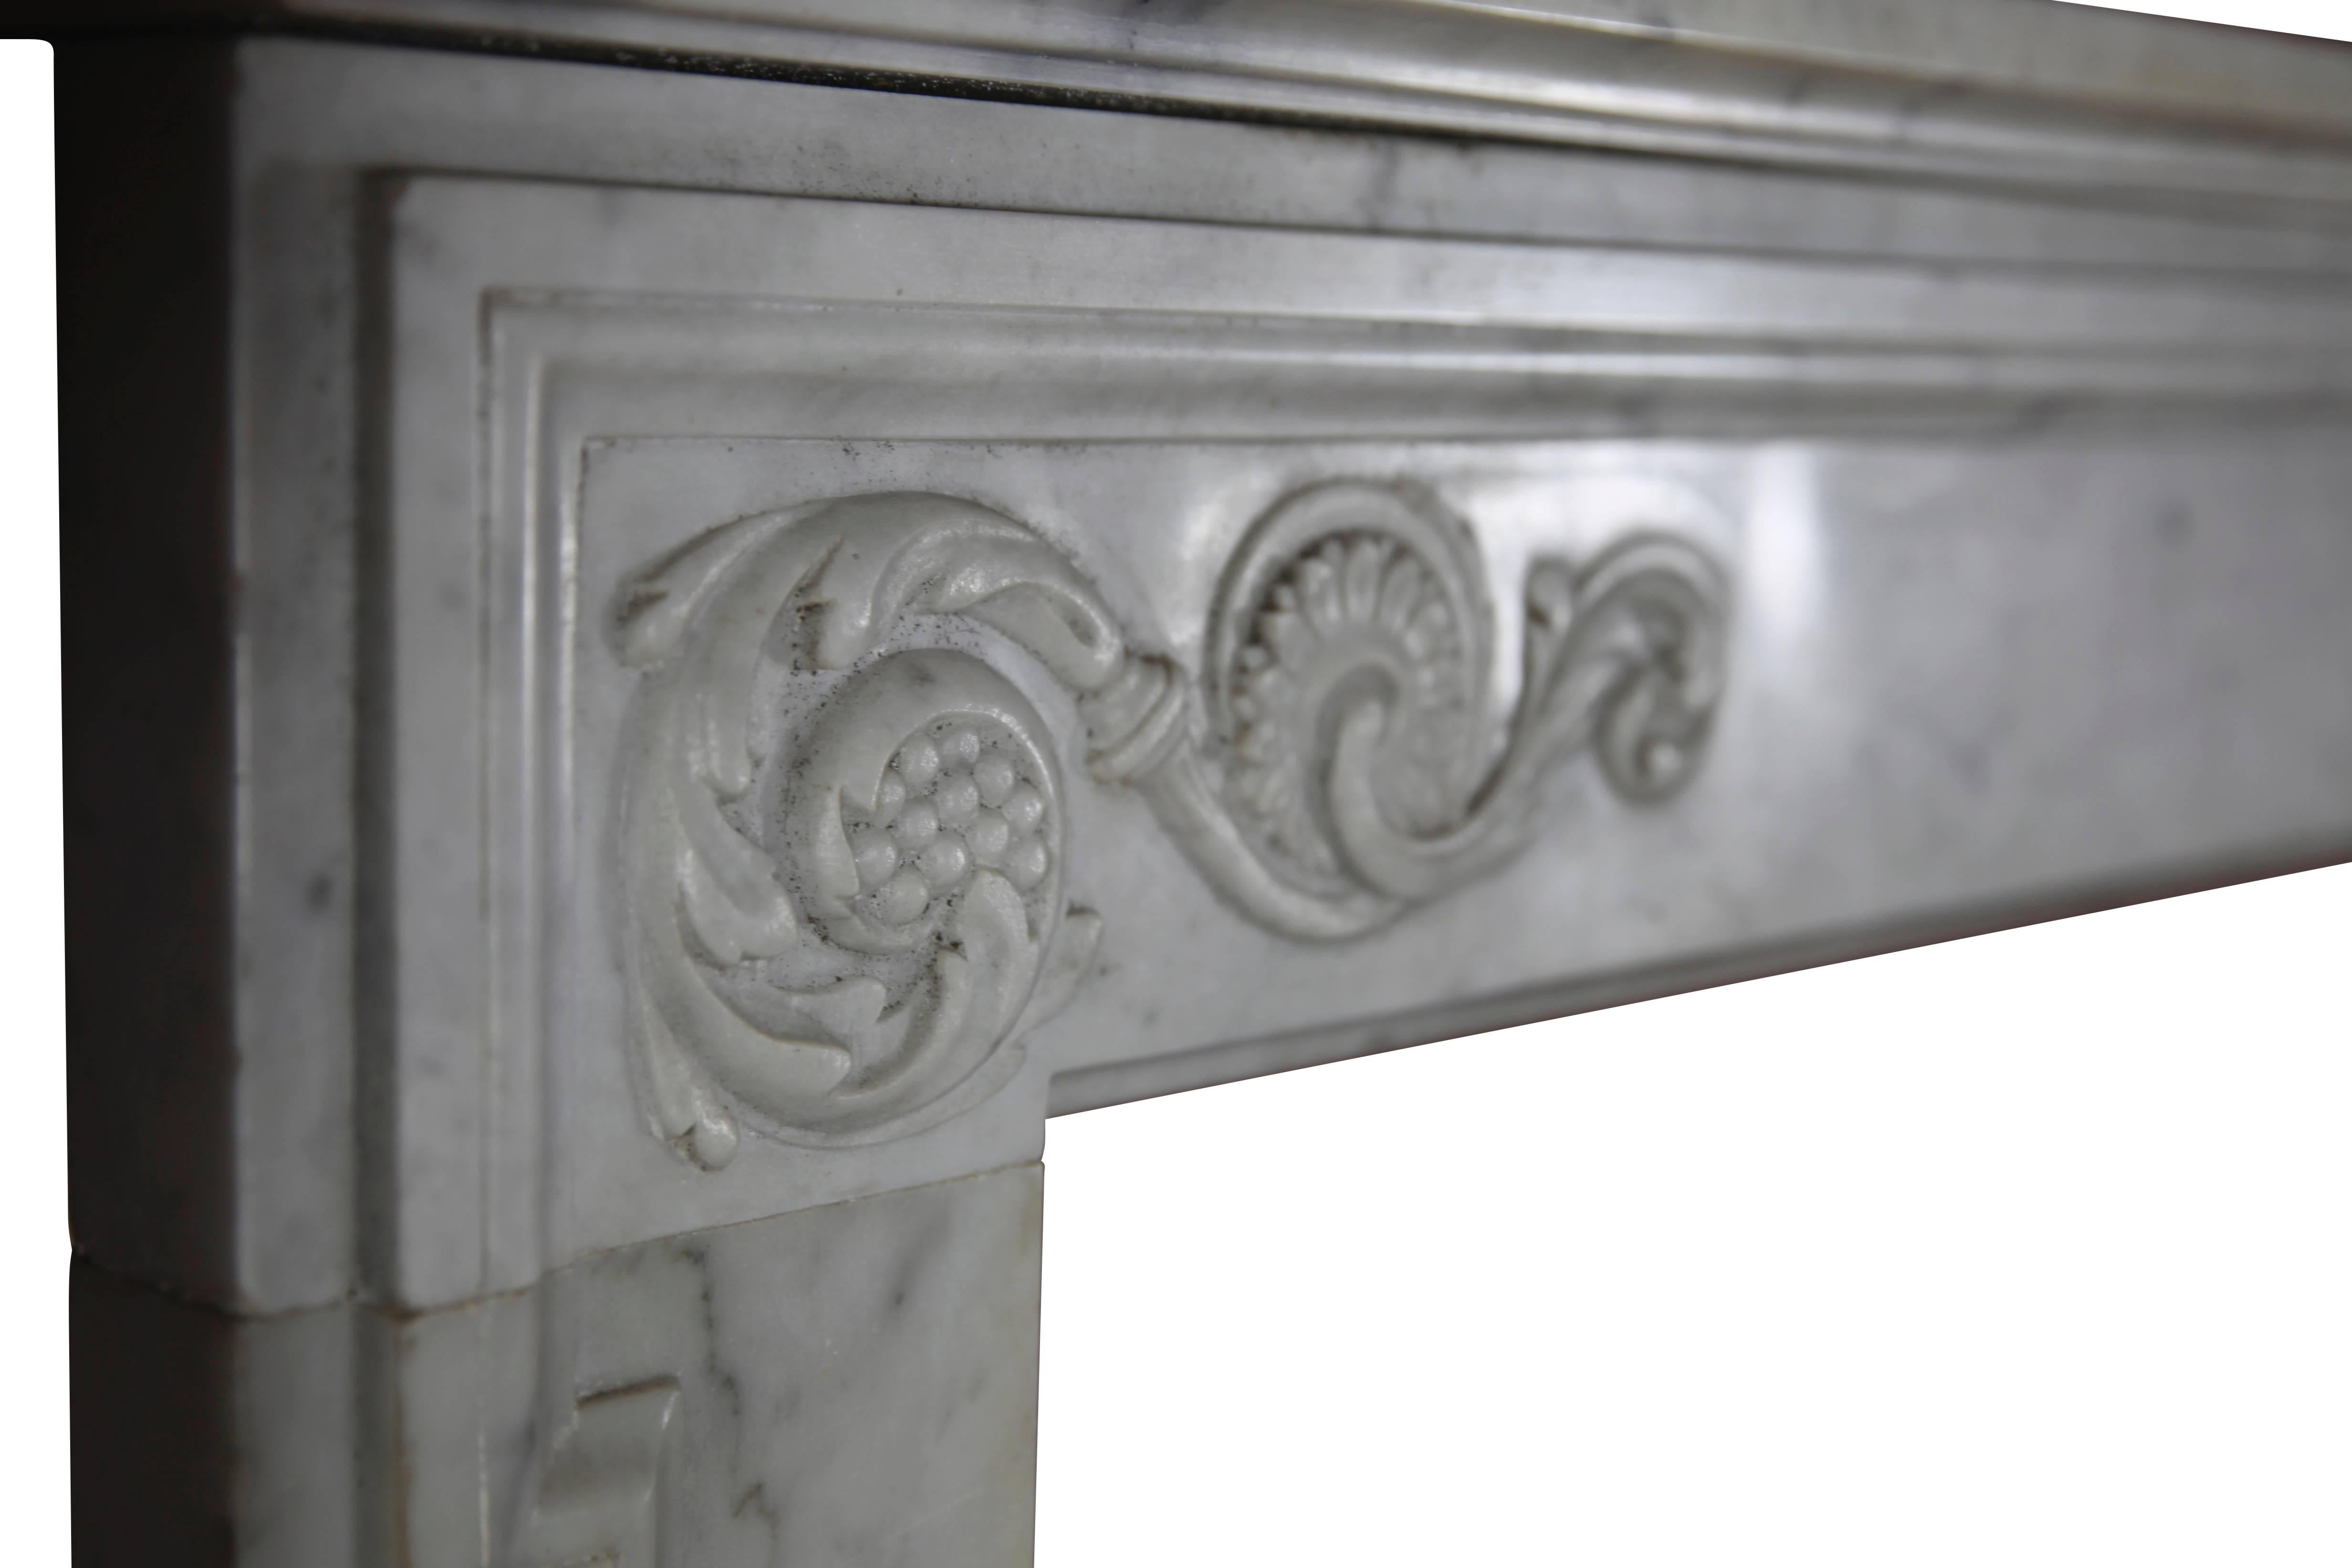 An elegant original vintage fireplace mantel (fireplace) with some nice and discrete carving on front and jambs.
Measures:
150 cm EW 59.06”.
107 cm EH 42.13”.
116 cm IW 45.66”.
88 cm IH 34.64”.
28 cm S 11.02”.
 